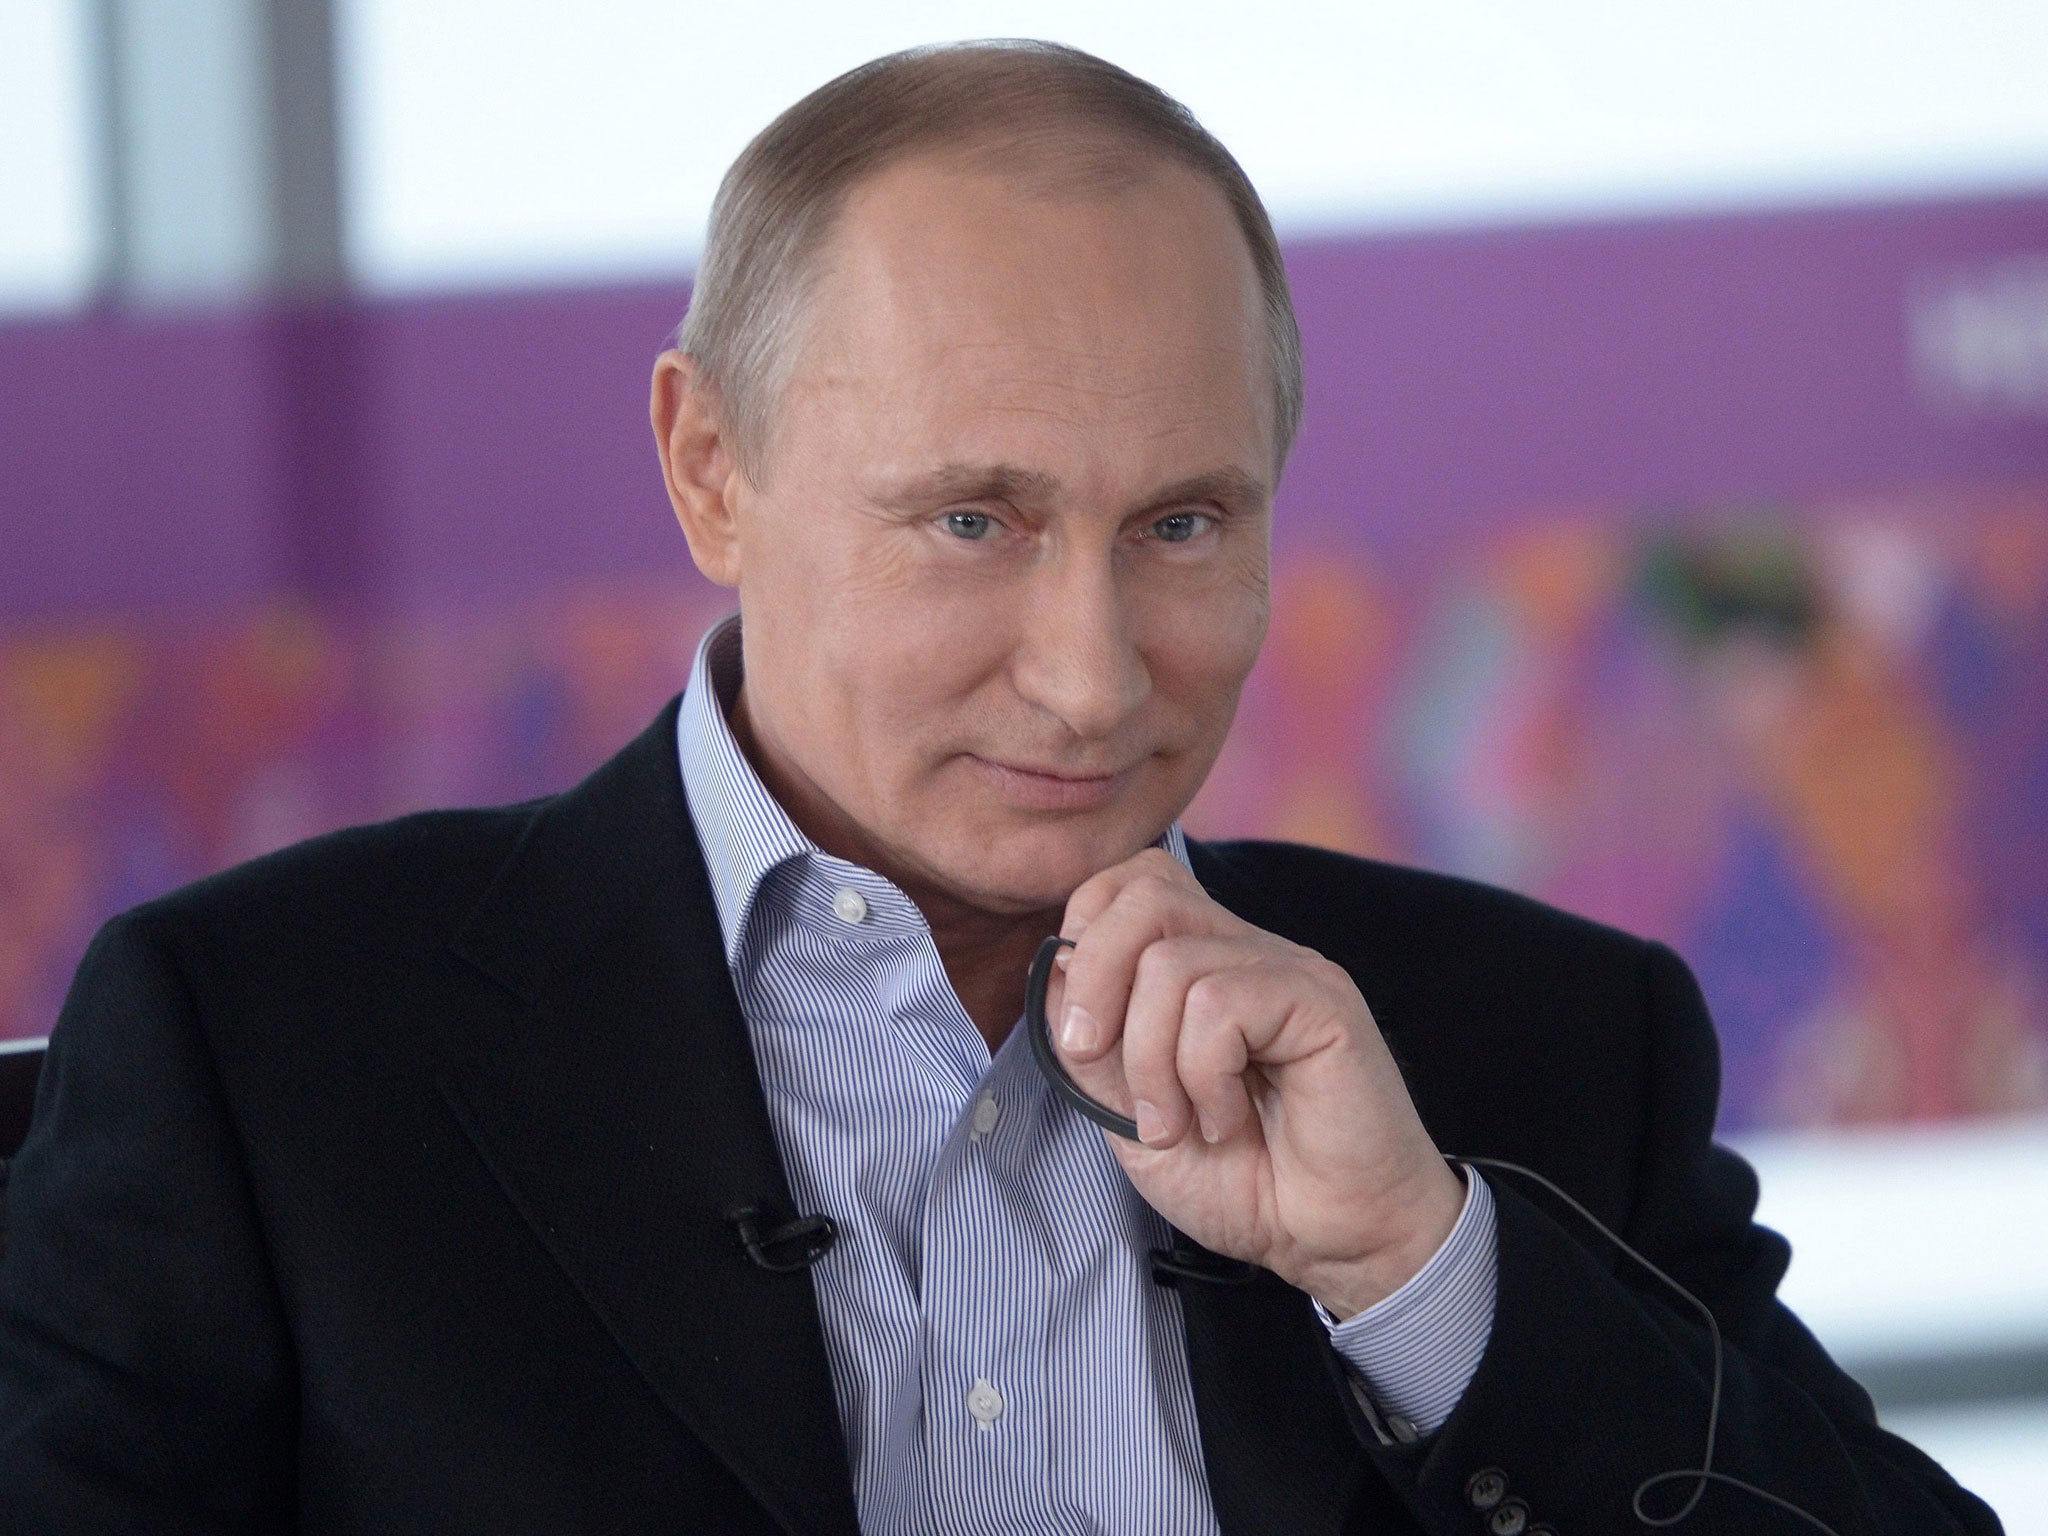 Russian President Vladimir Putin talks to the BBC’s Andrew Marr during an interview in Sochi